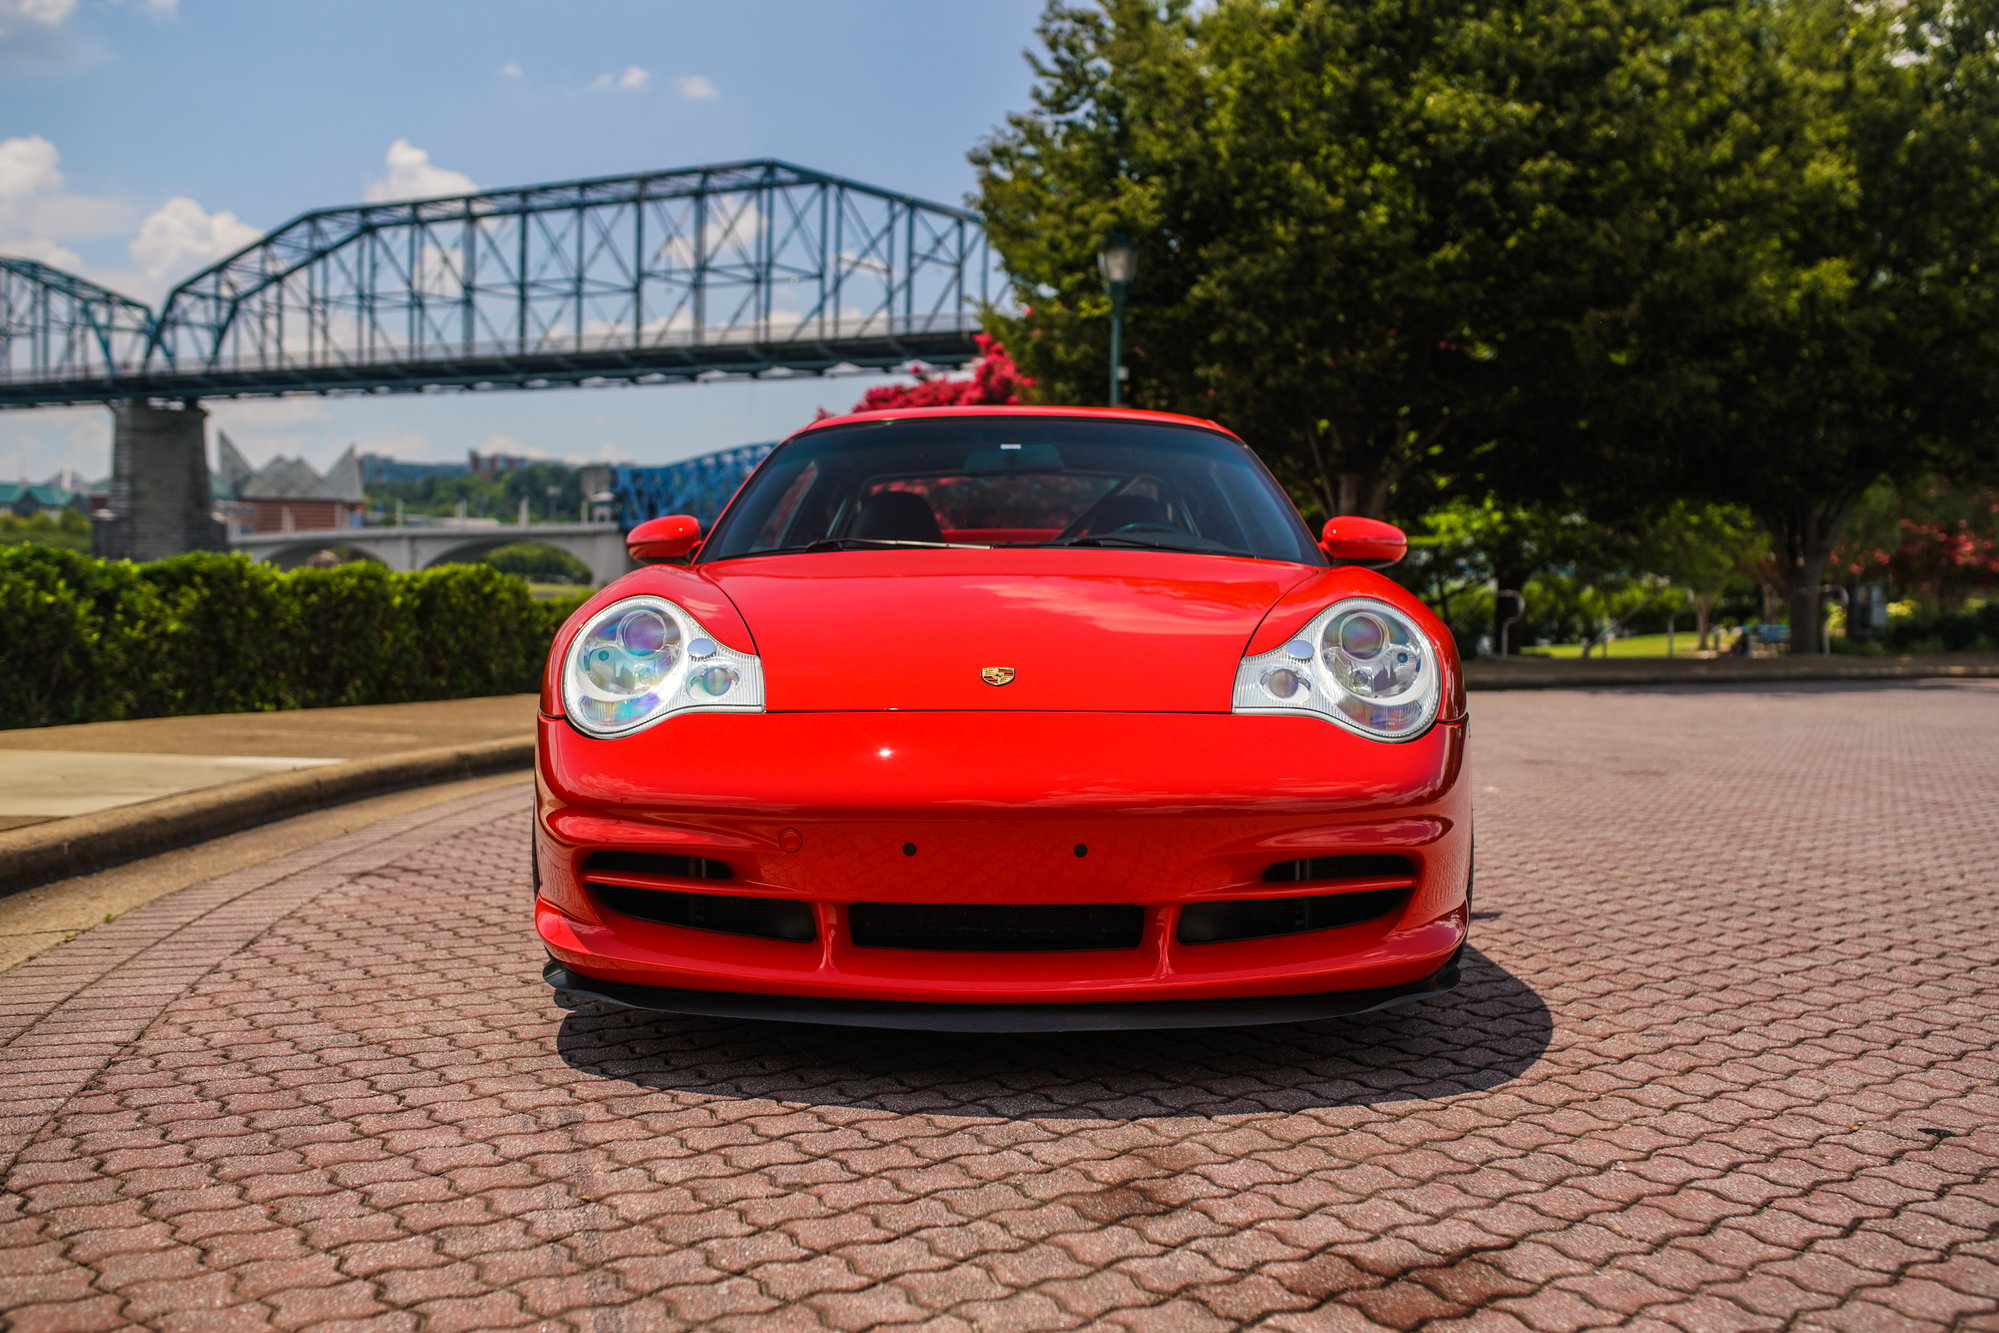 2004 Porsche GT3 -  - Used - VIN WP0AC299X4S692903 - 74,000 Miles - 6 cyl - Manual - Red - Chattanooga, TN 37363, United States